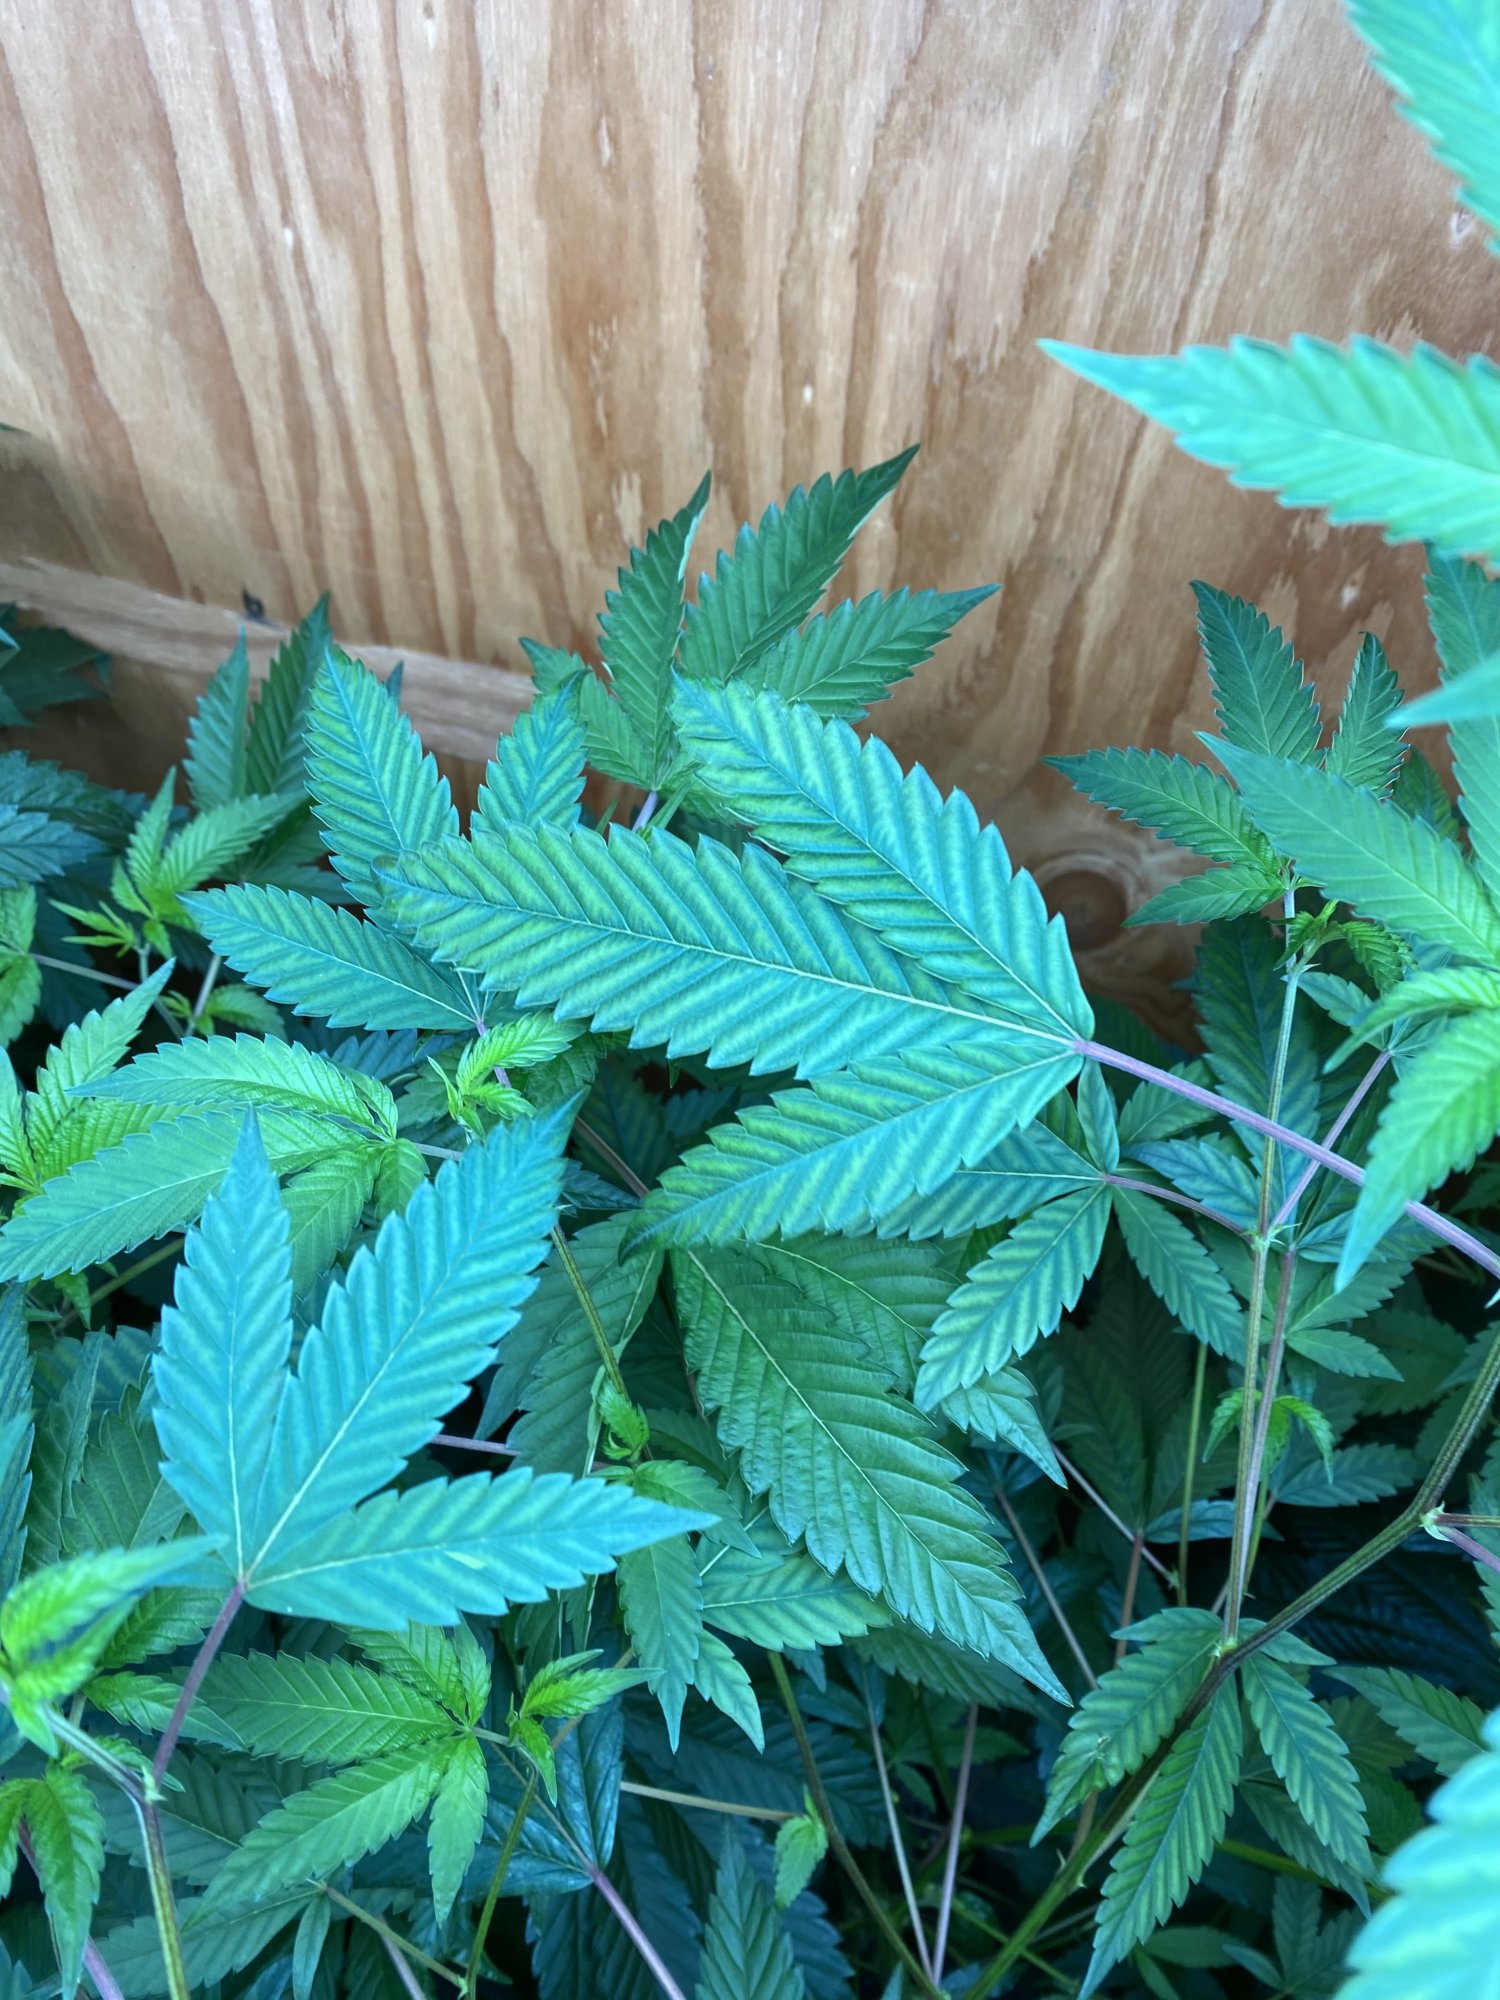 Second opinion on deficiency 6